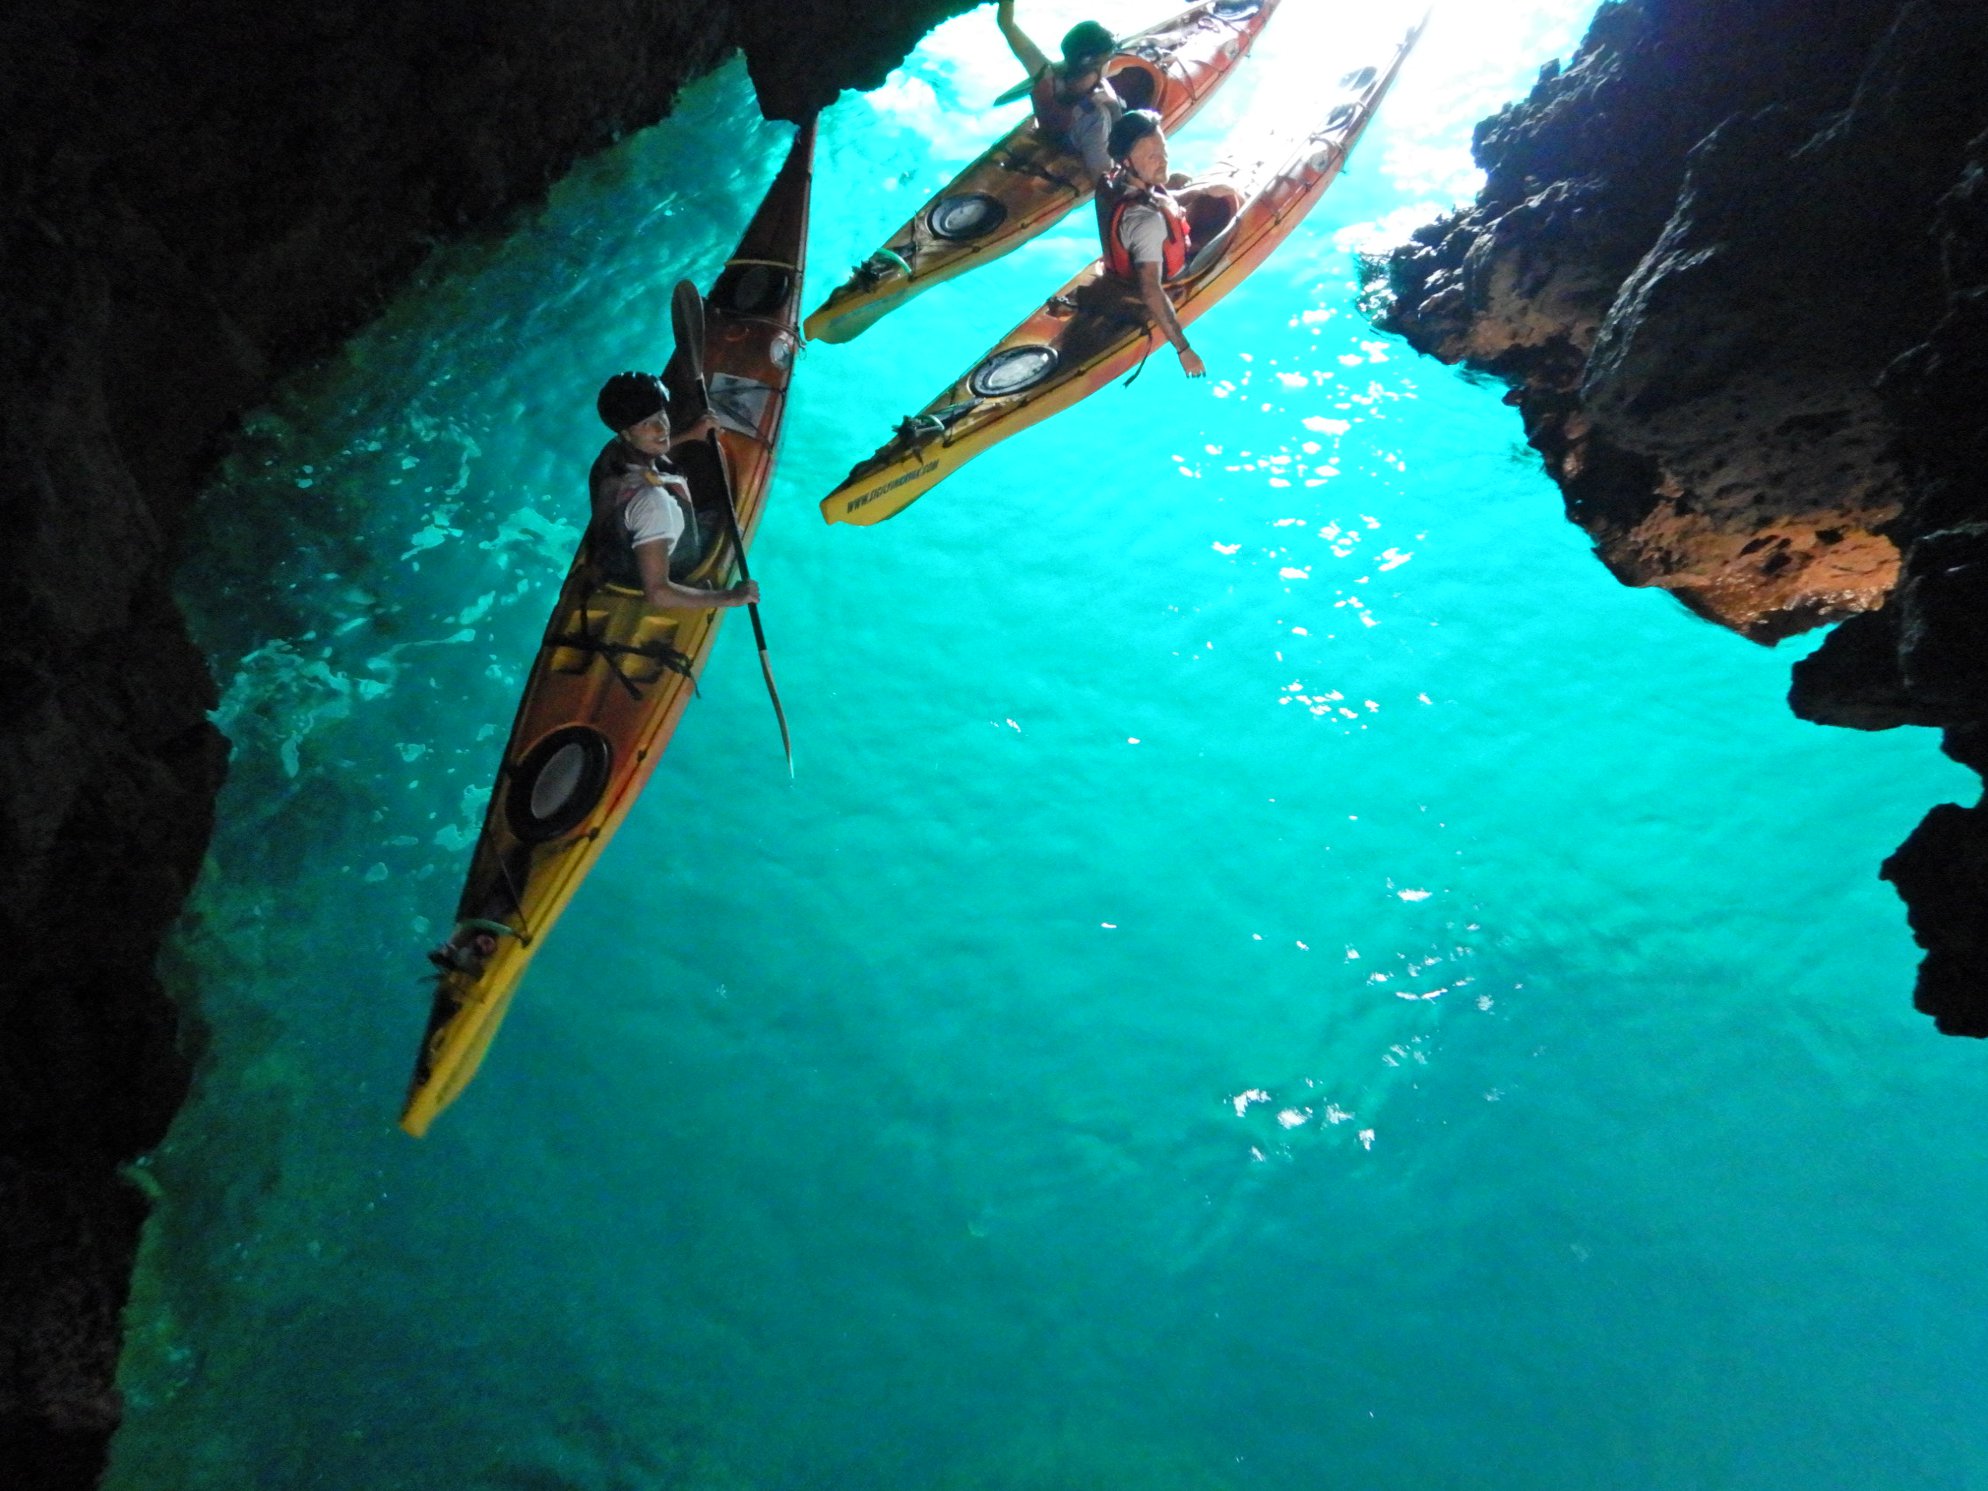 Daily guided excursions Sea Kayak & Snorkeling to the Aeolian Islands 